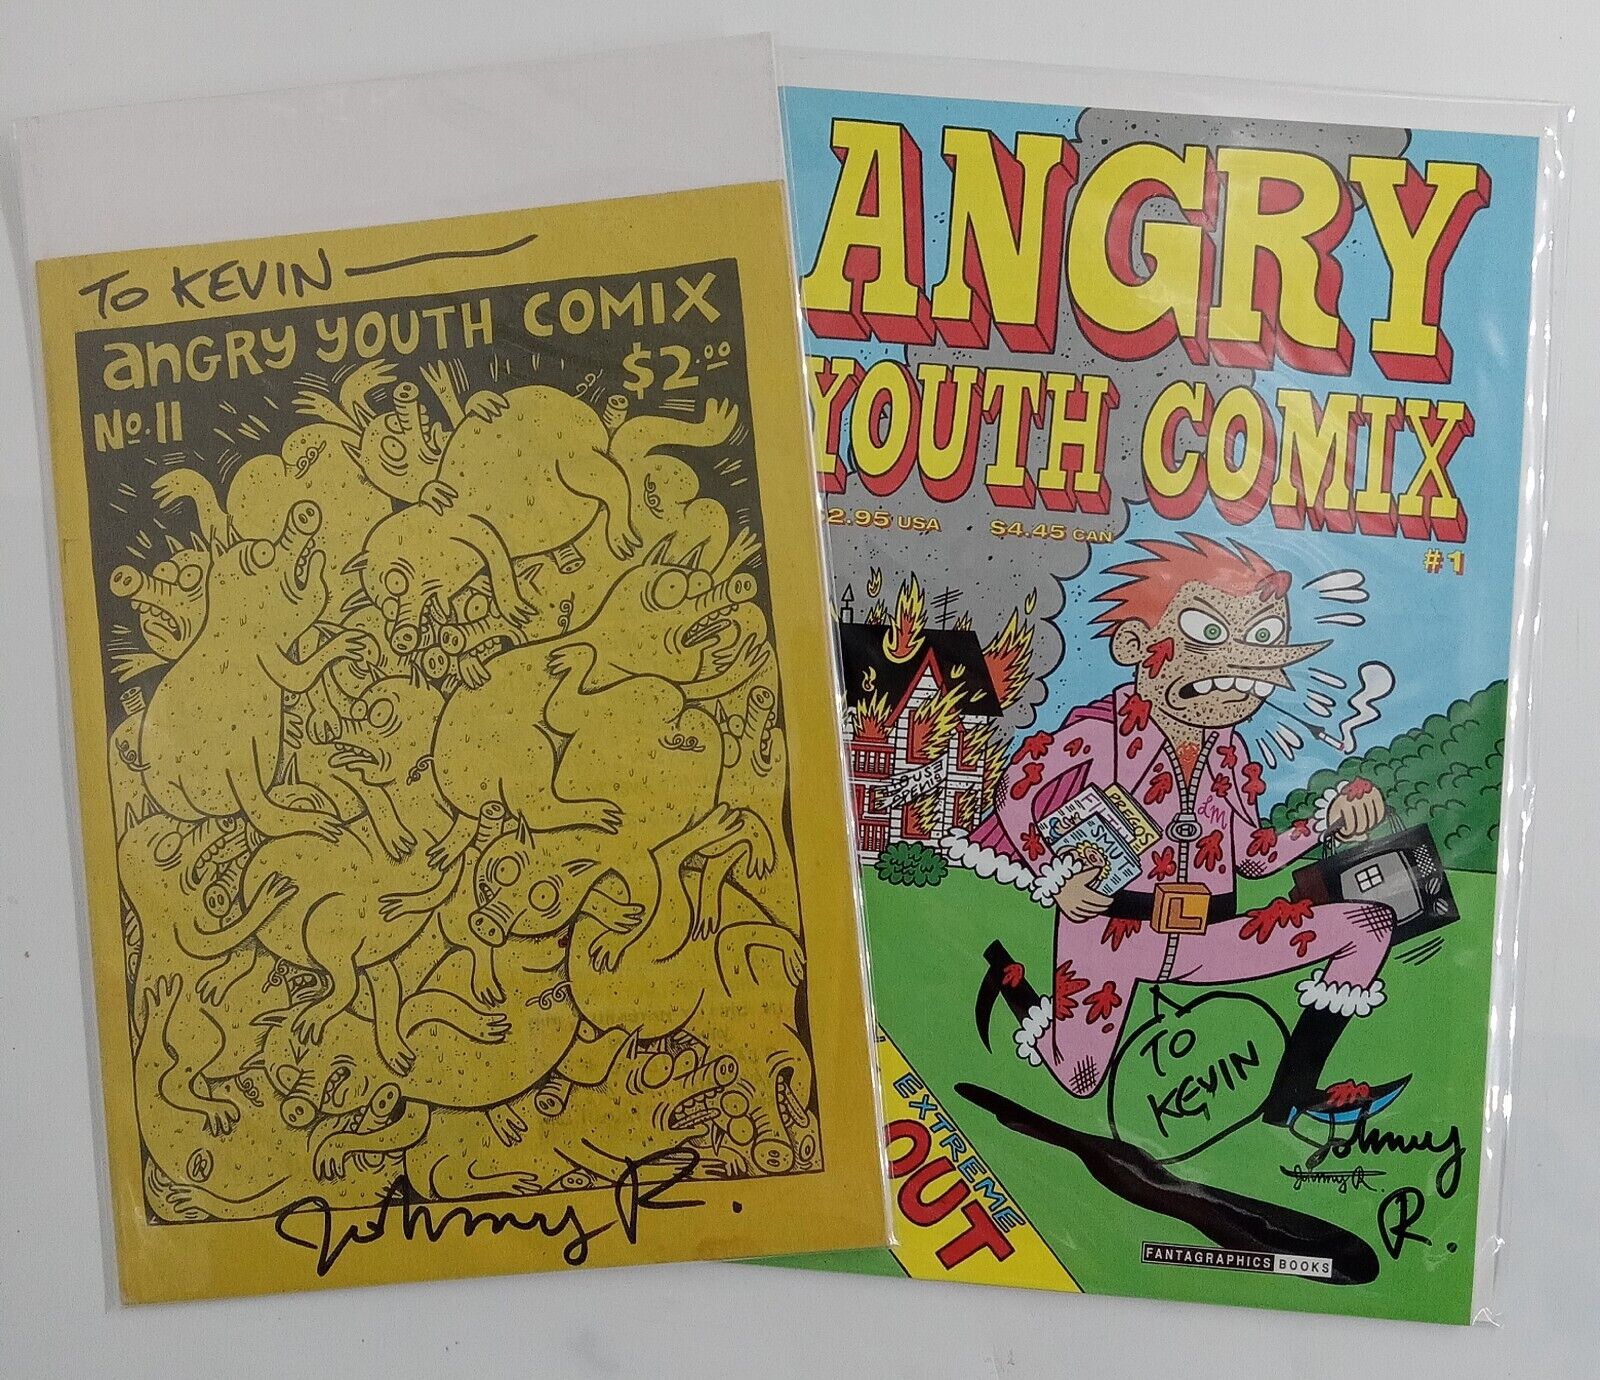 Angry Youth Comix Signed Rare Self Published Vol.1 #11 & AYC #1 by Johnny Ryan 